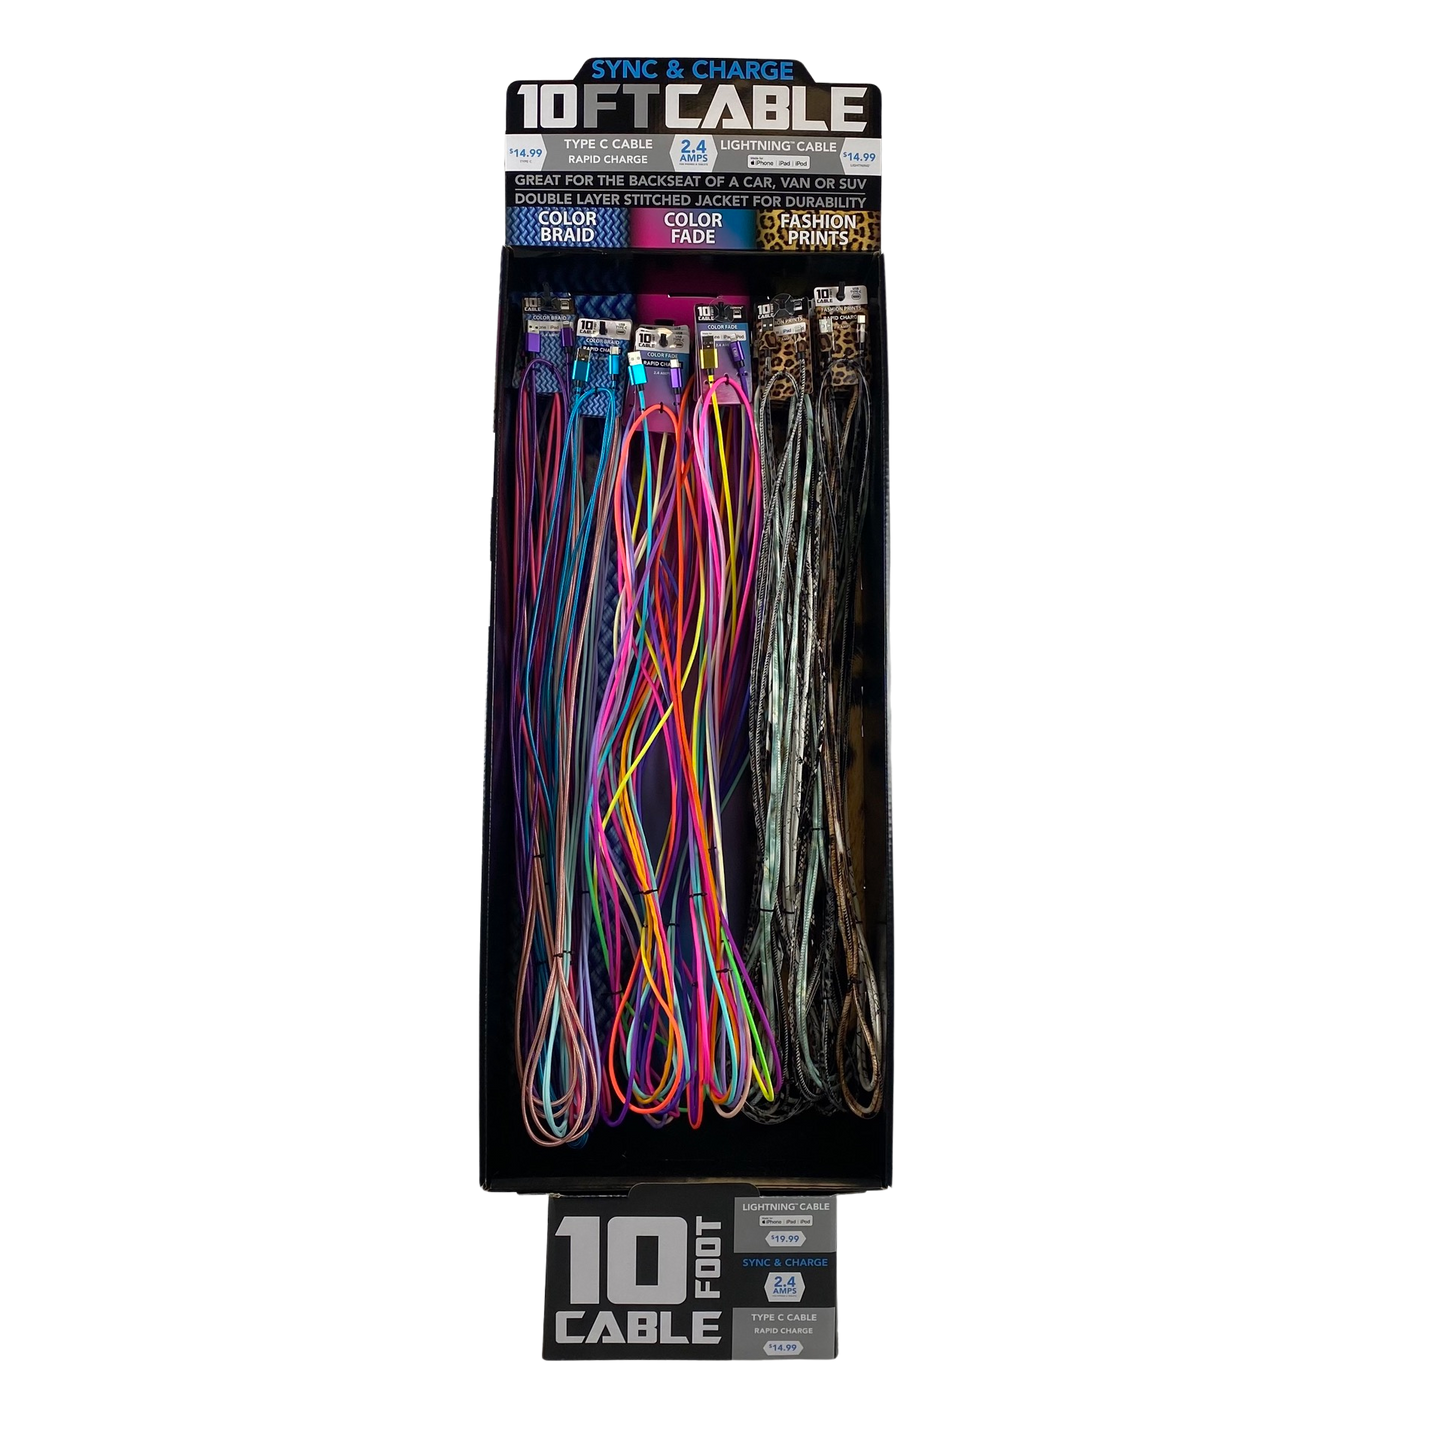 ITEM NUMBER 088385 10FT BRAIDED CABLES FLOOR DISPLAY 36 PIECES PER DISPLAY